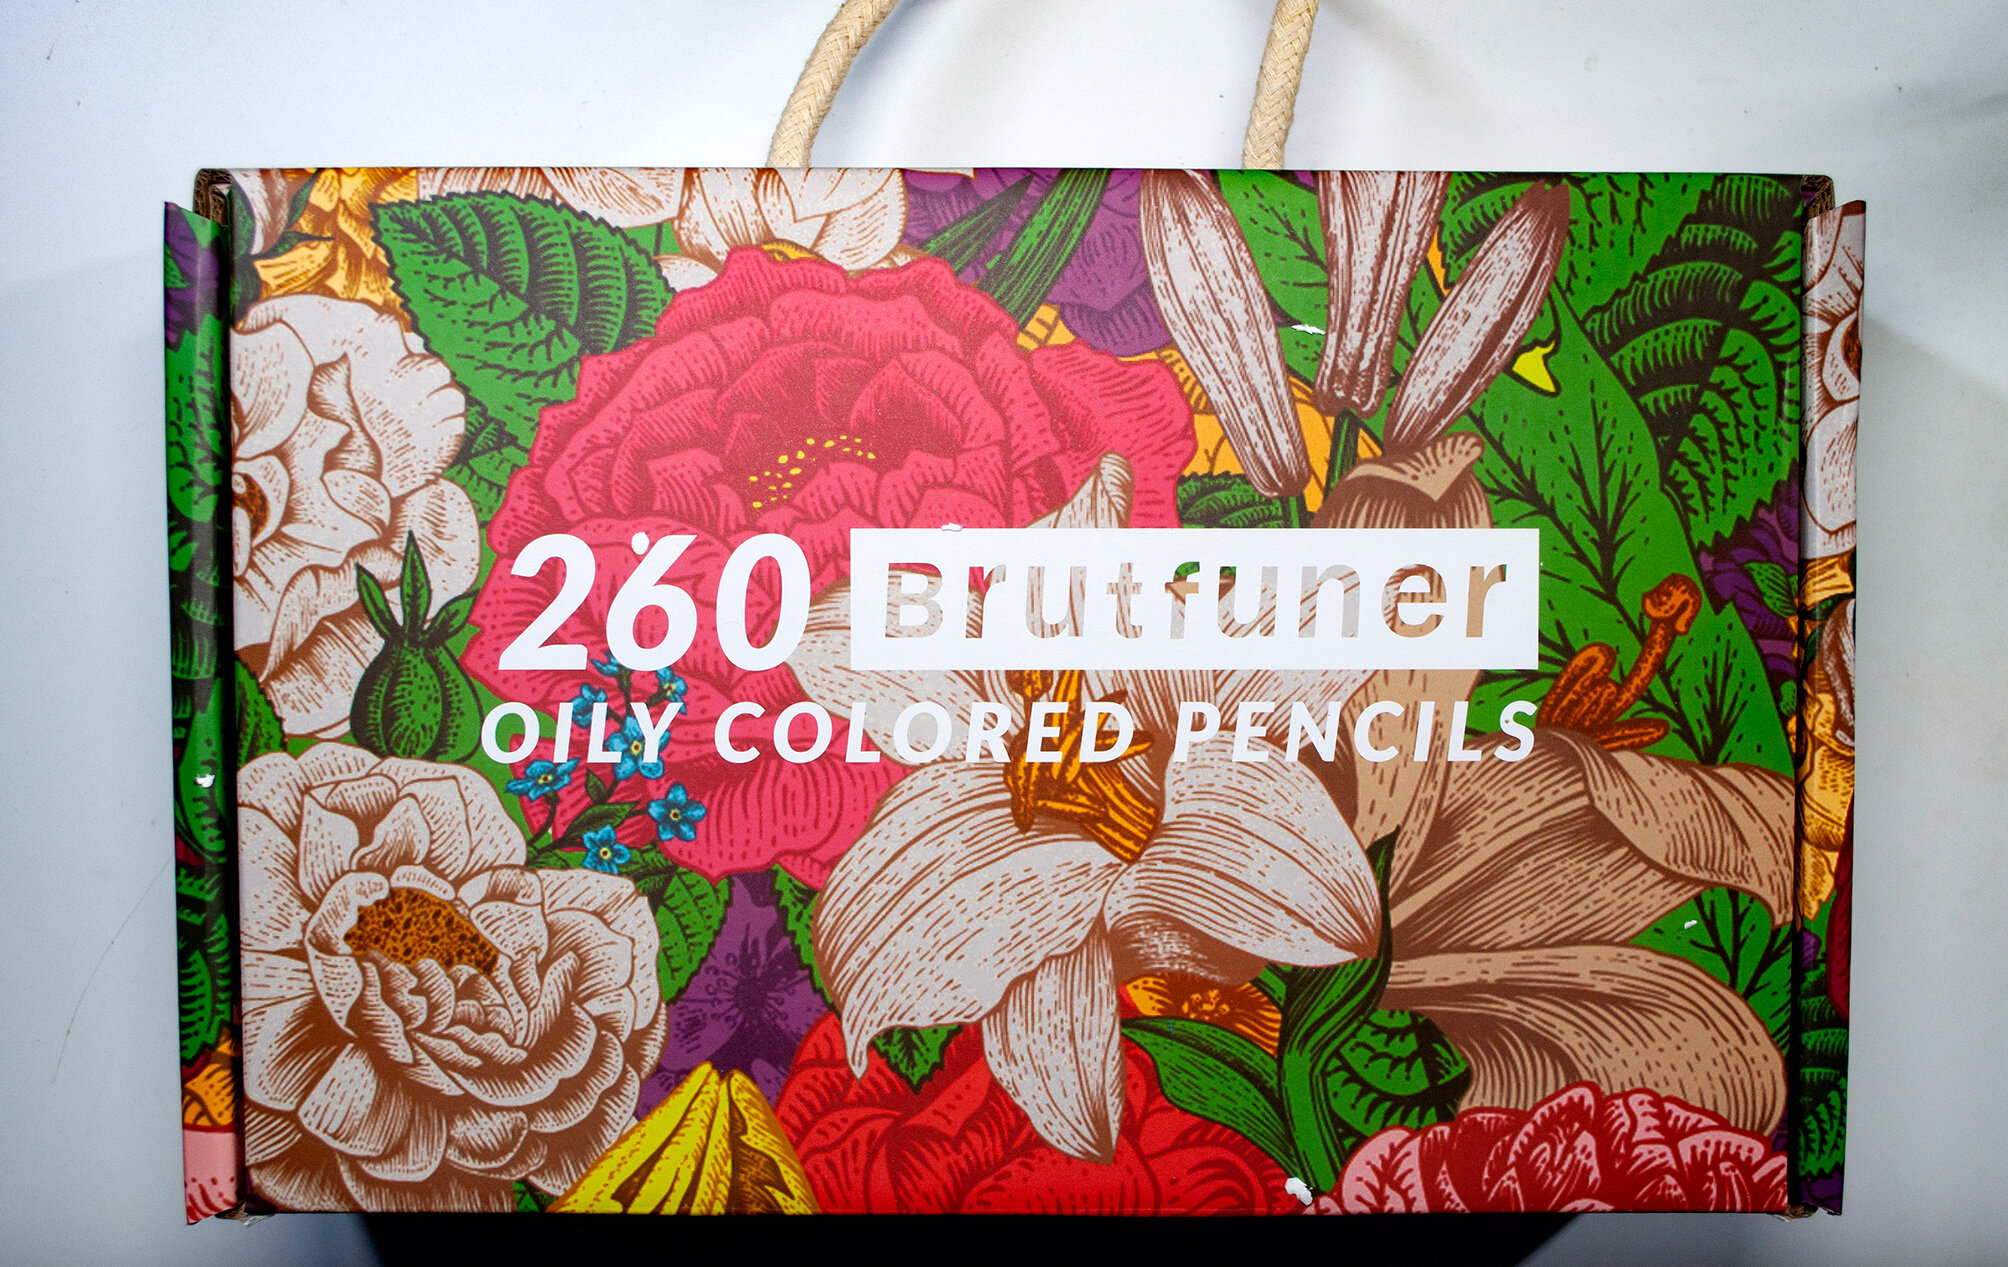 520 Brutfuner Professional 260 Colored Pencils Andstal Soft Core Color  Pencil For Artists Coloring Sketching Drawing